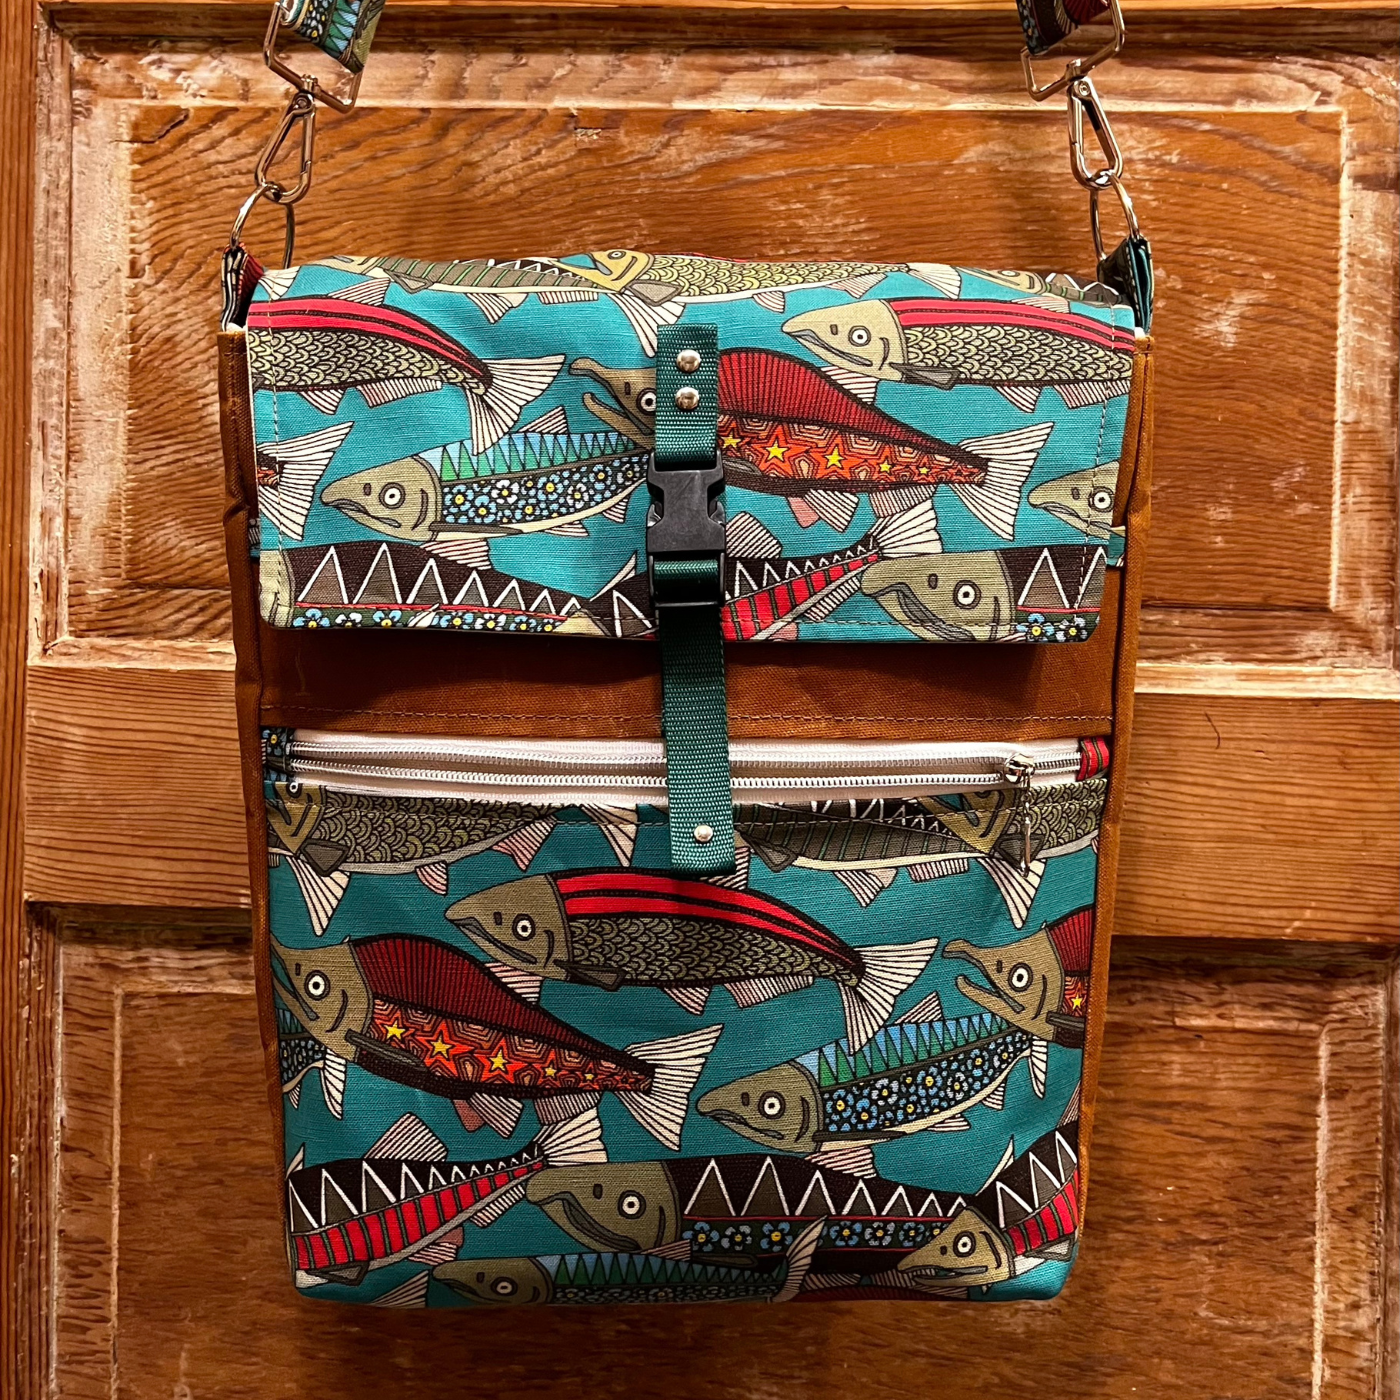 A handmade rectangular bag with a fish design (with a turquoise background and red, green, and blue fish, some going to the left, some going to the right) hangs against a brown wooden door. A buckle clasp closes the bag in the middle of the top third